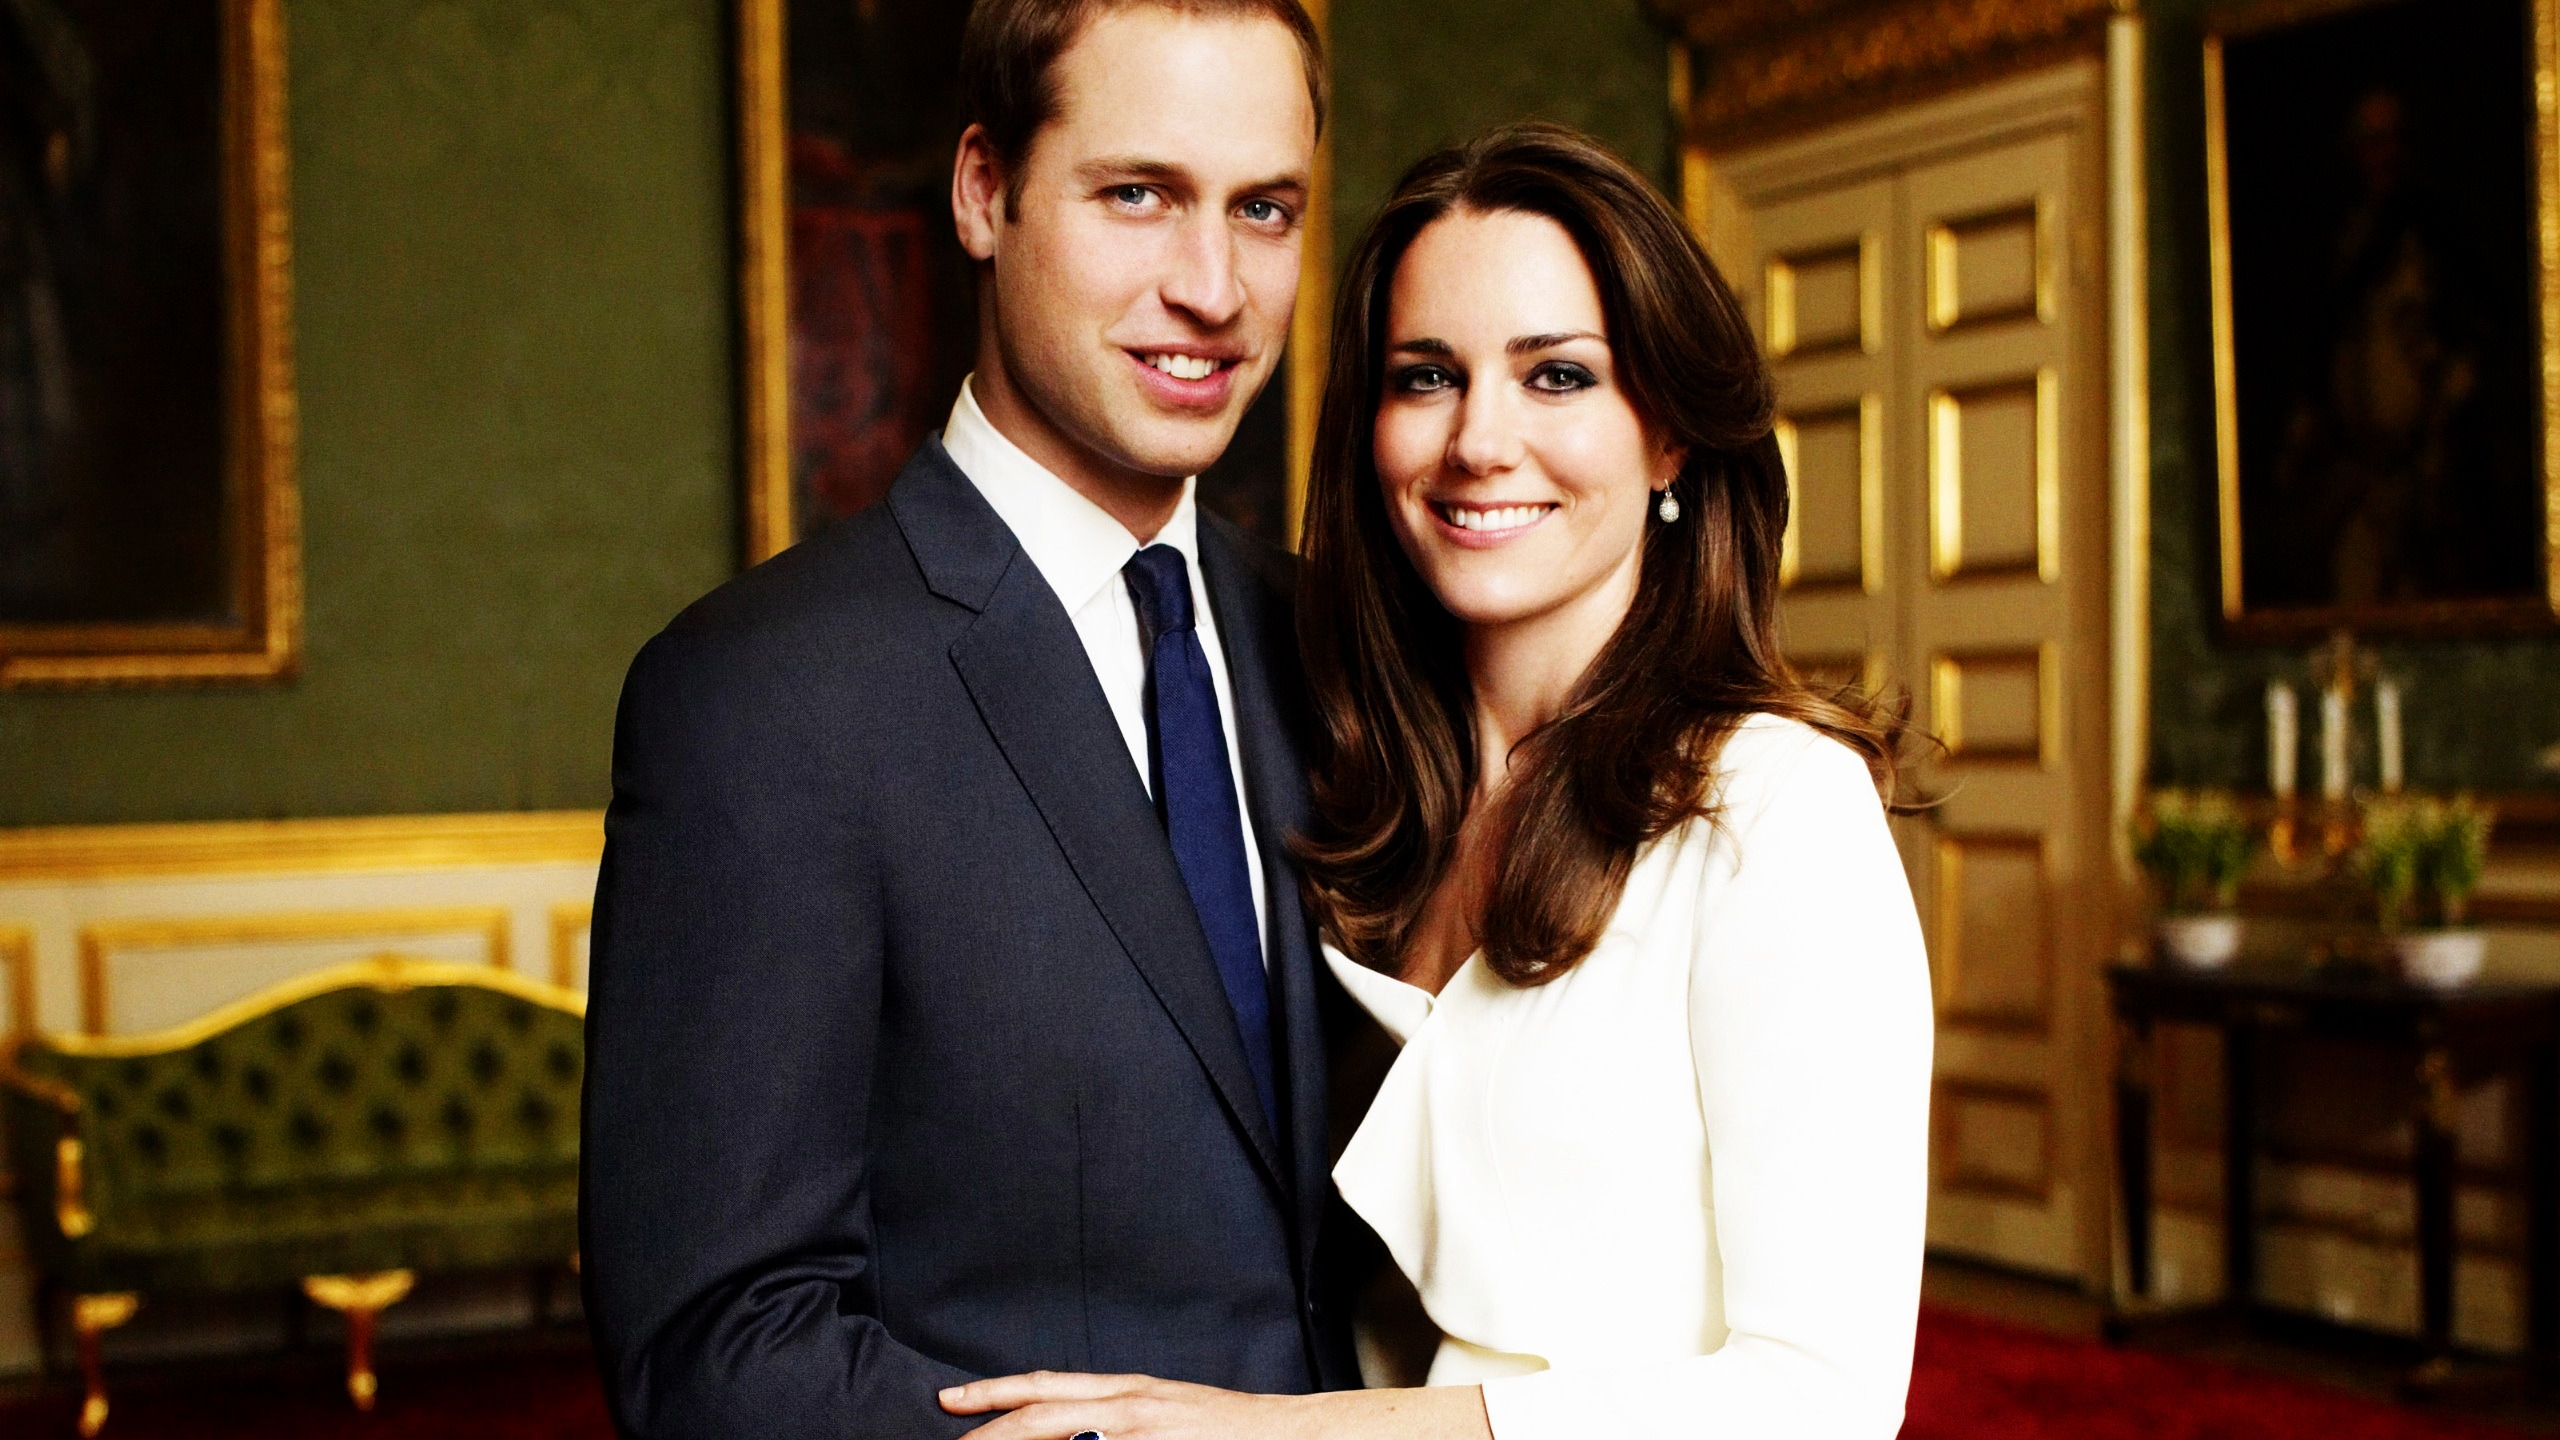 Kate Middleton and Prince William for 2560x1440 HDTV resolution